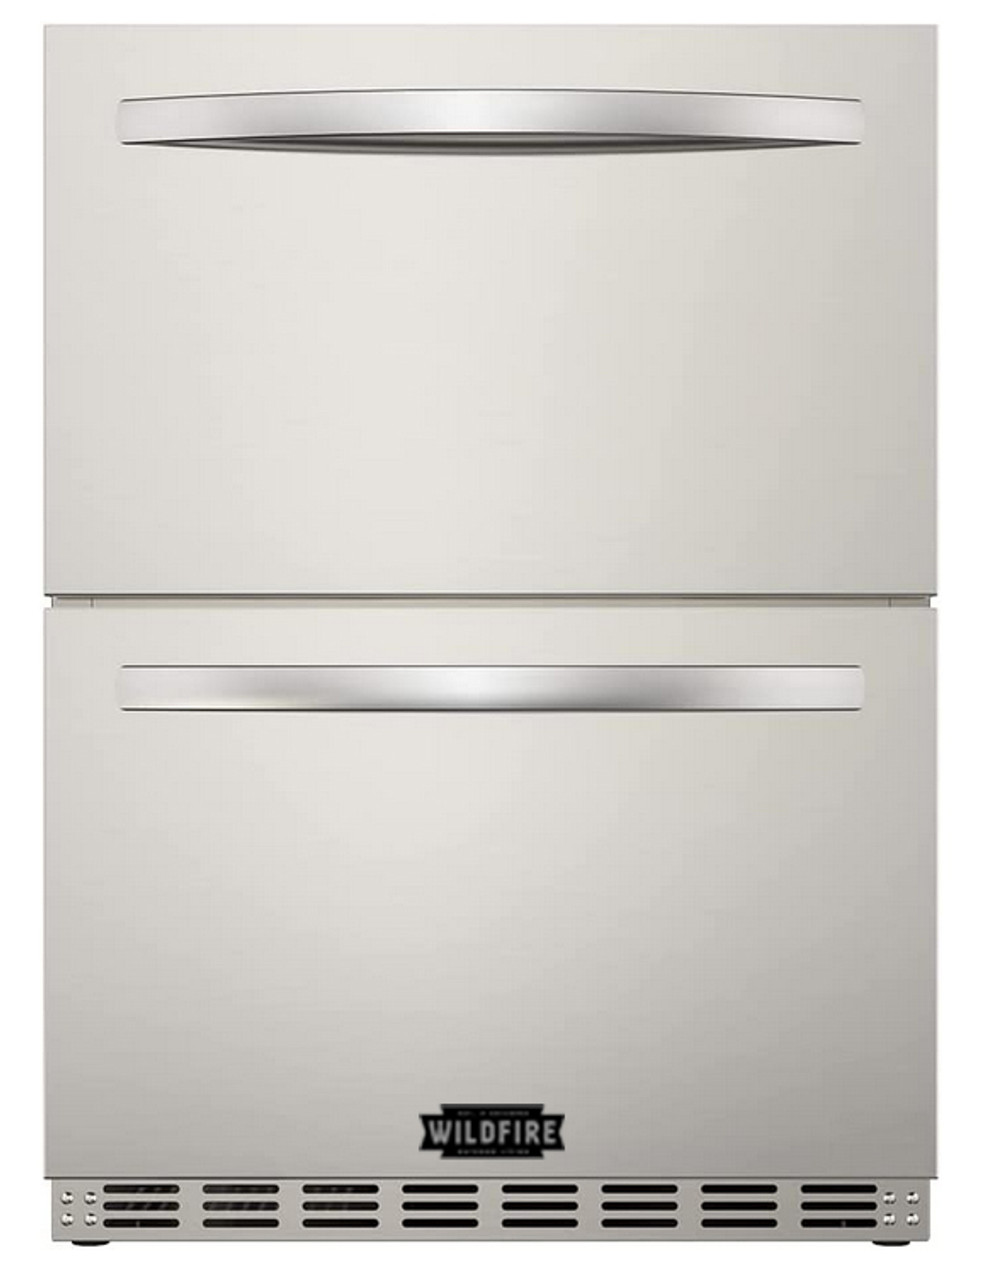 Wildfire 24 Built-In Dual Drawer Outdoor Refrigerator